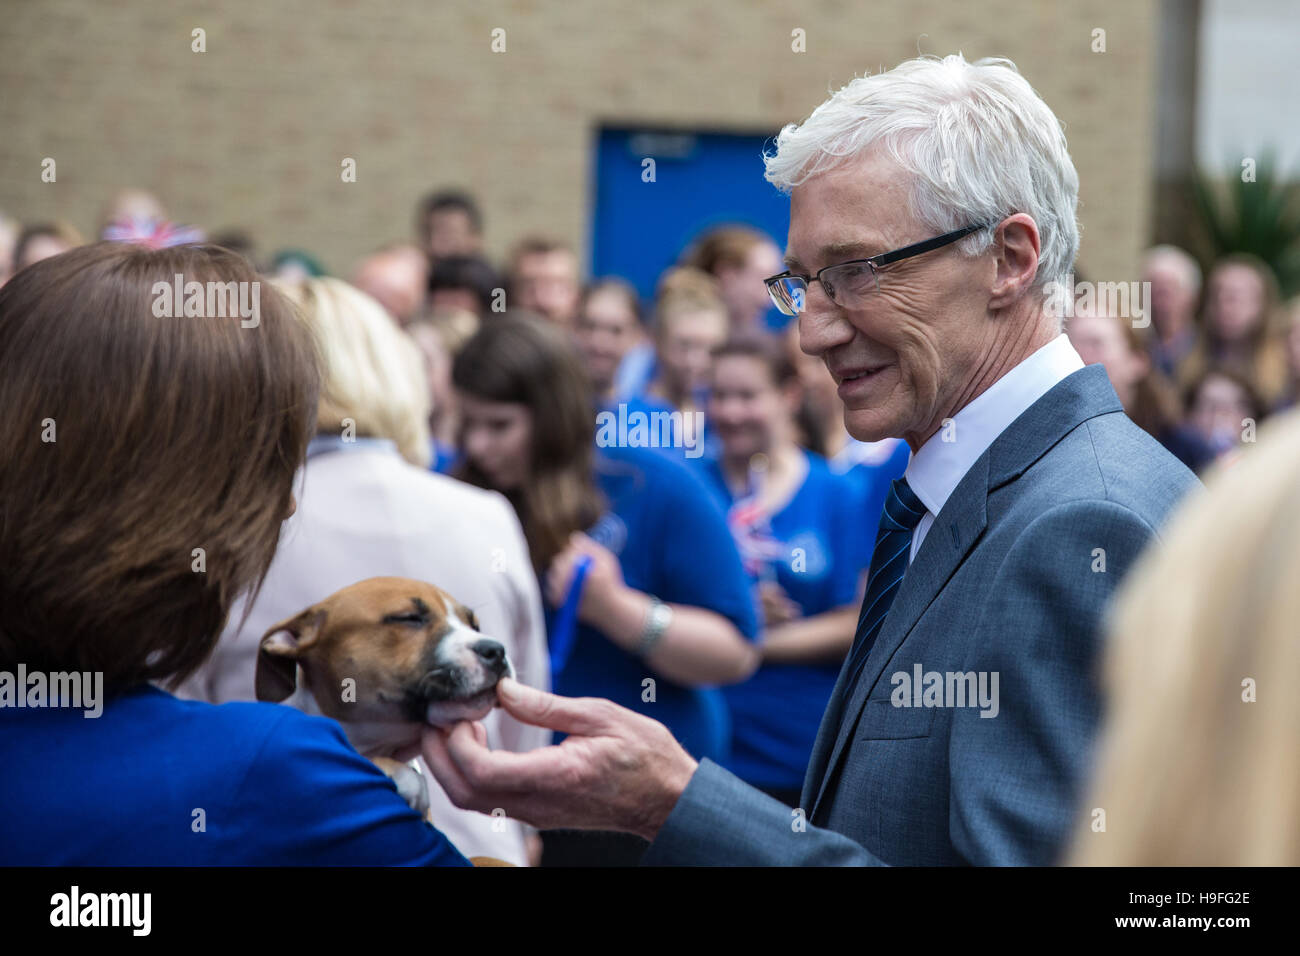 London, UK. 7th September, 2016. Paul O'Grady accompanies the Duchess of Cornwall on a visit to Battersea Dogs and Cats Home. Stock Photo